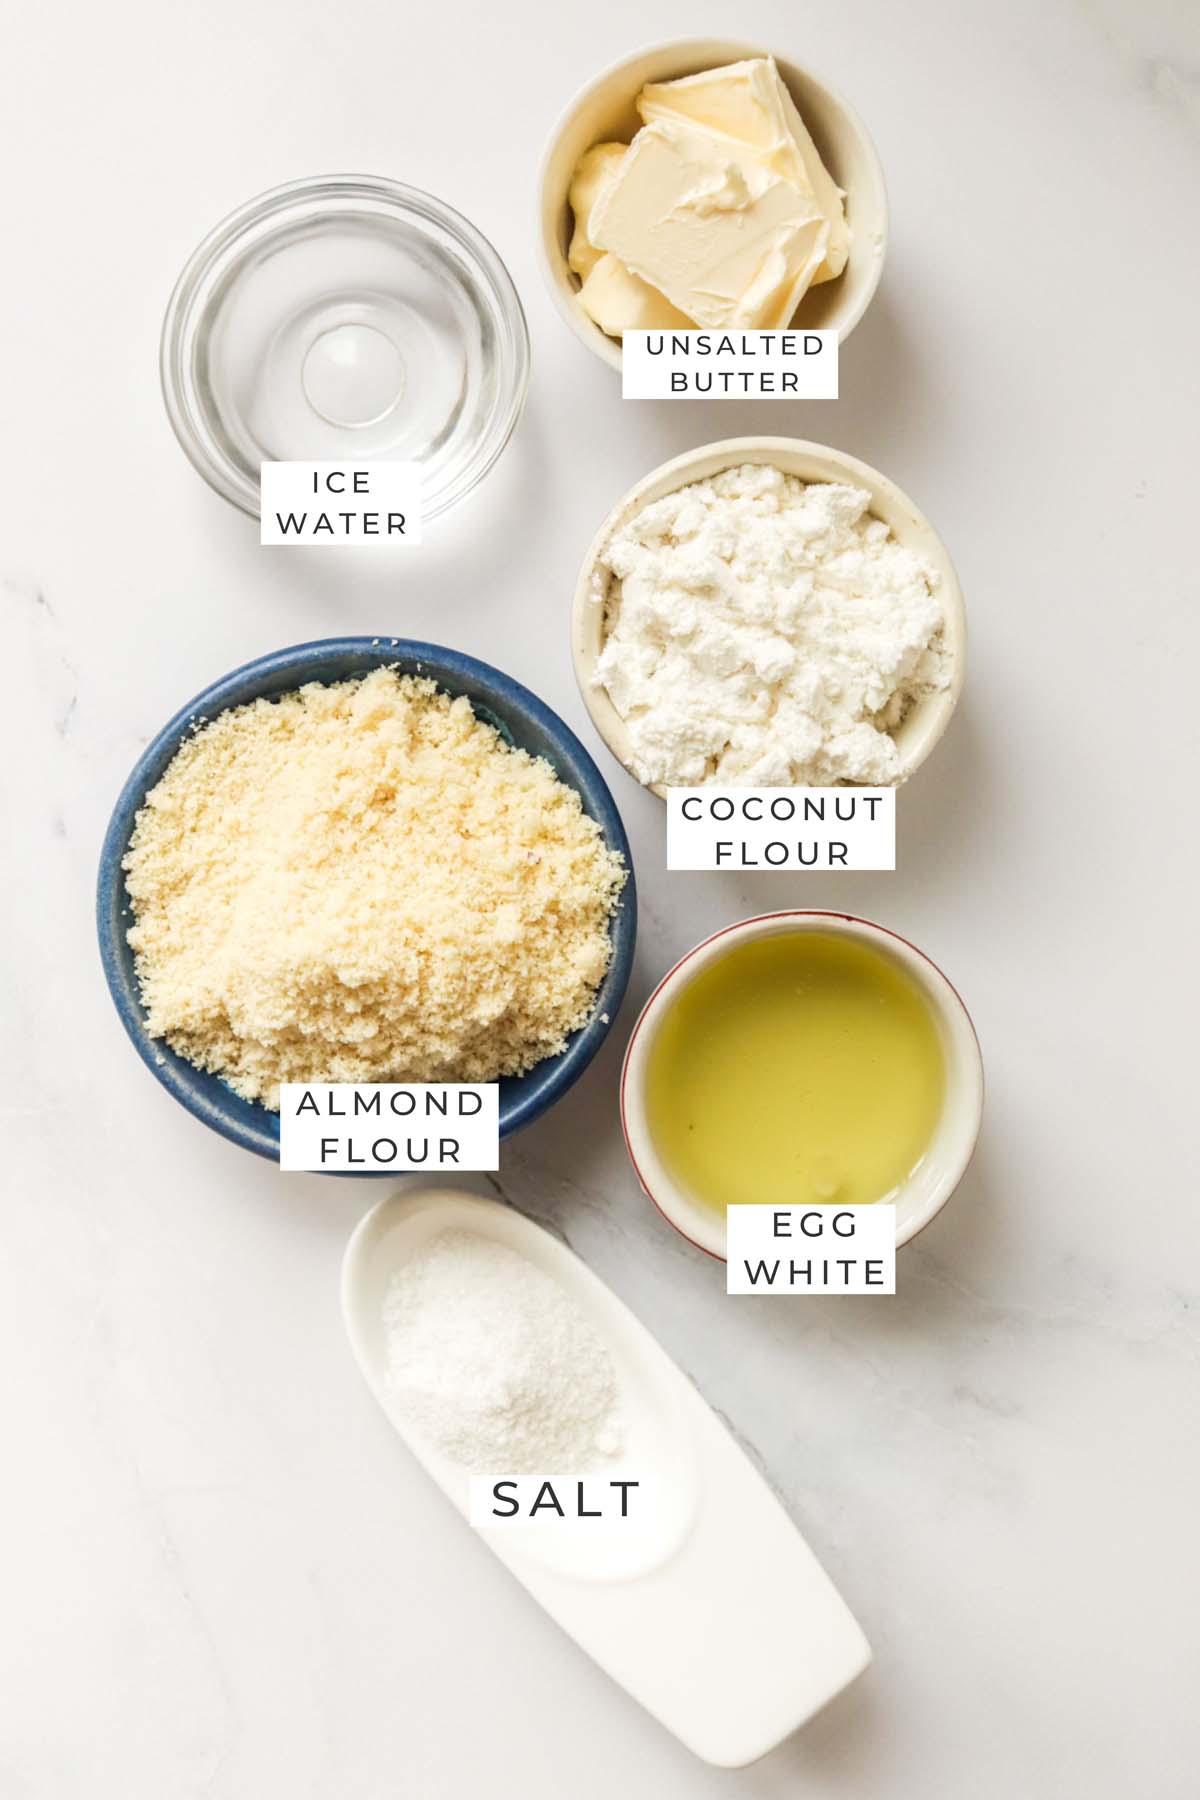 Labeled ingredients for the pie crust.